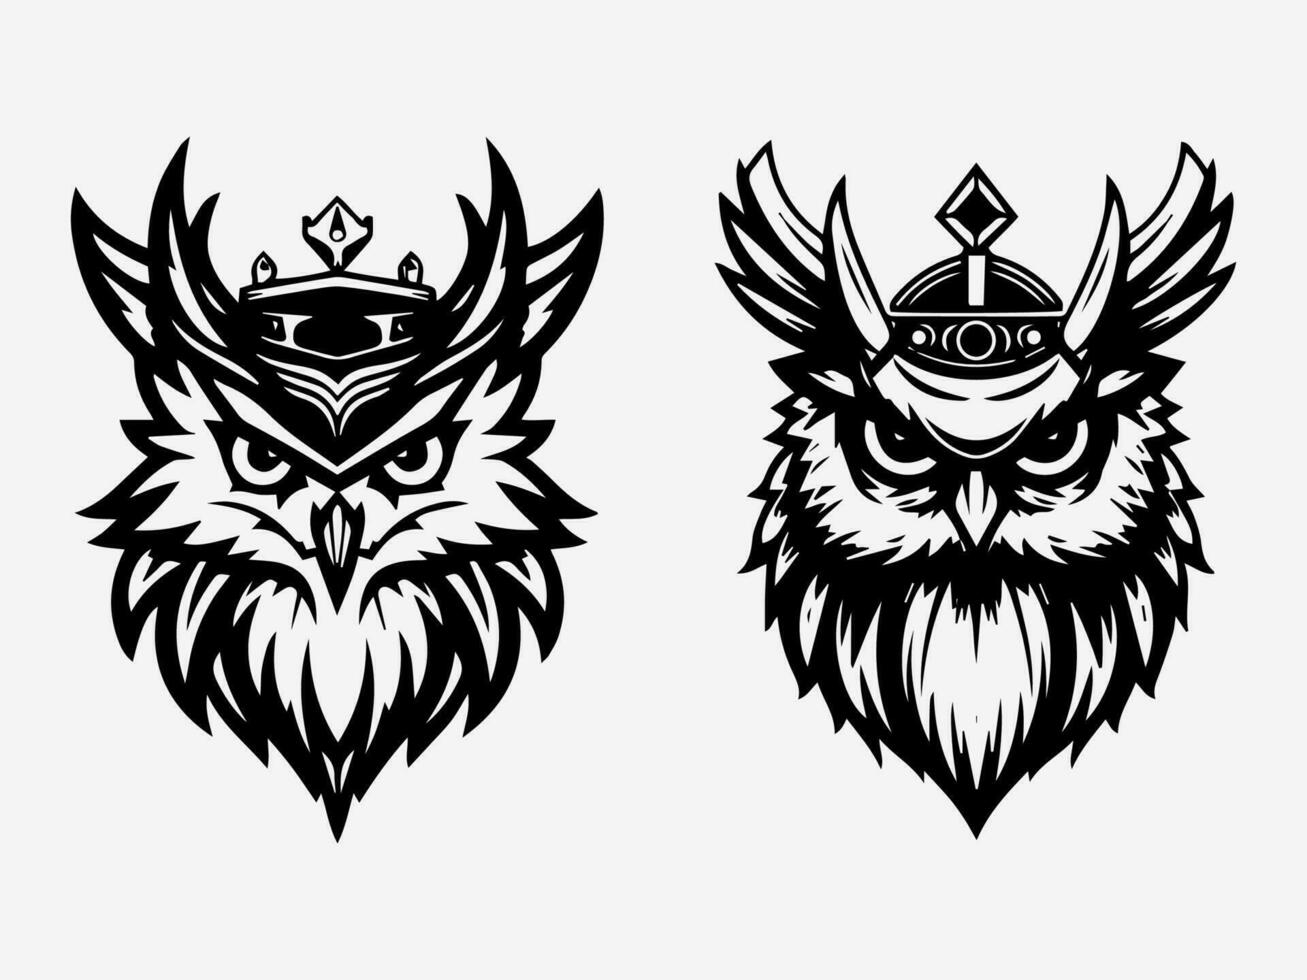 Artistic hand drawn illustration of an owl, capturing its majestic presence and enigmatic charm in a logo design vector